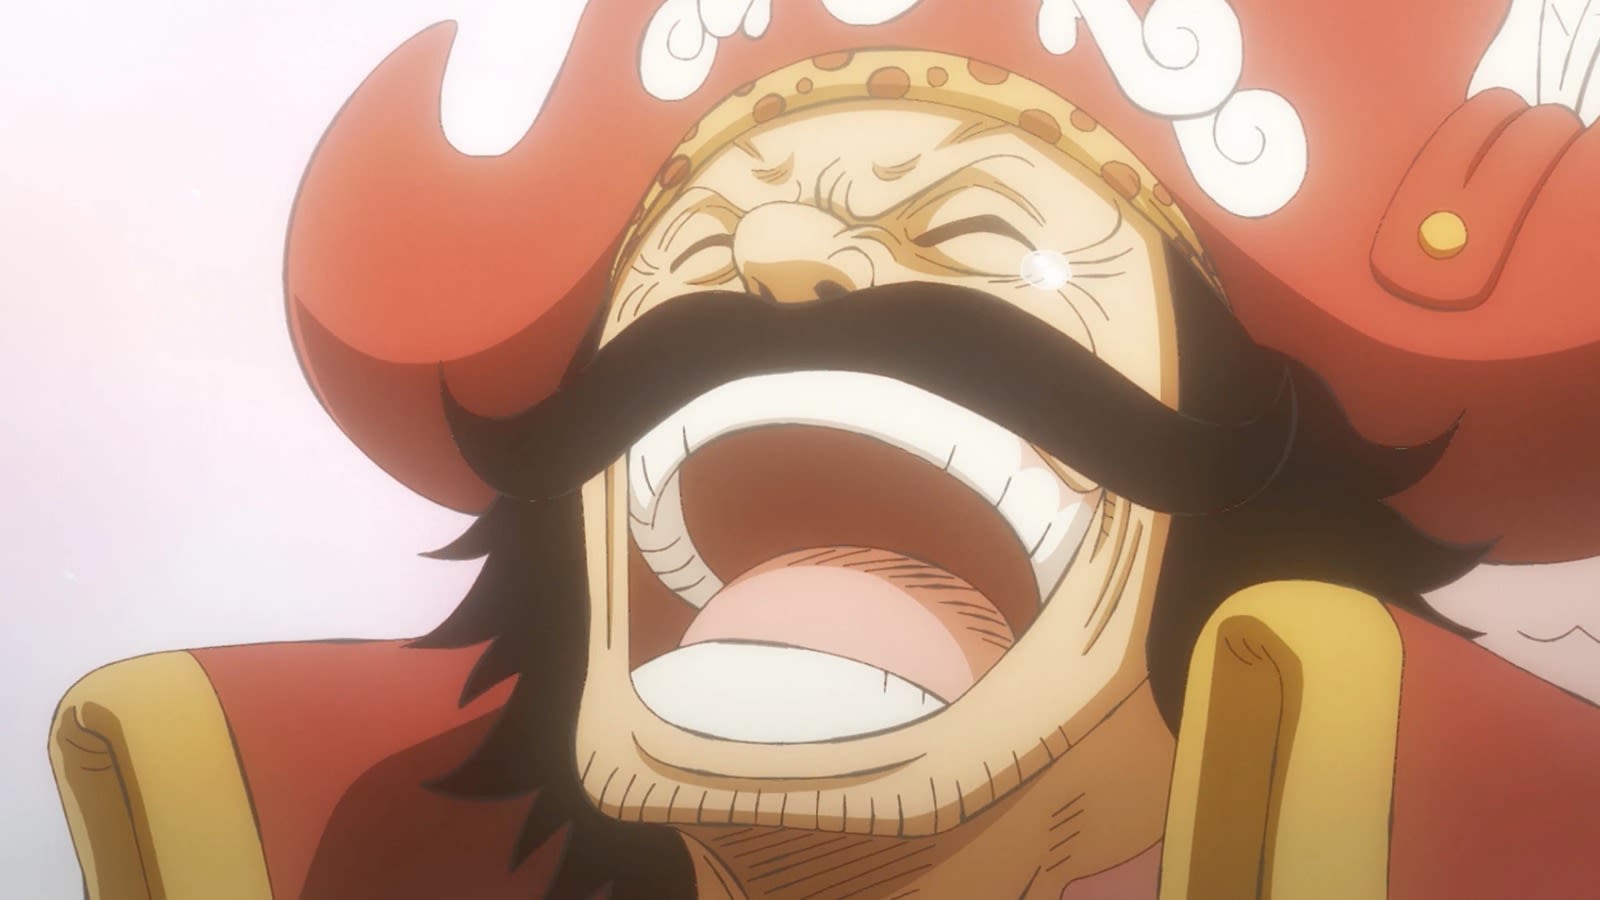 One Piece Chapter 1116: Popular character facing fraud allegations has fans split - Dexerto